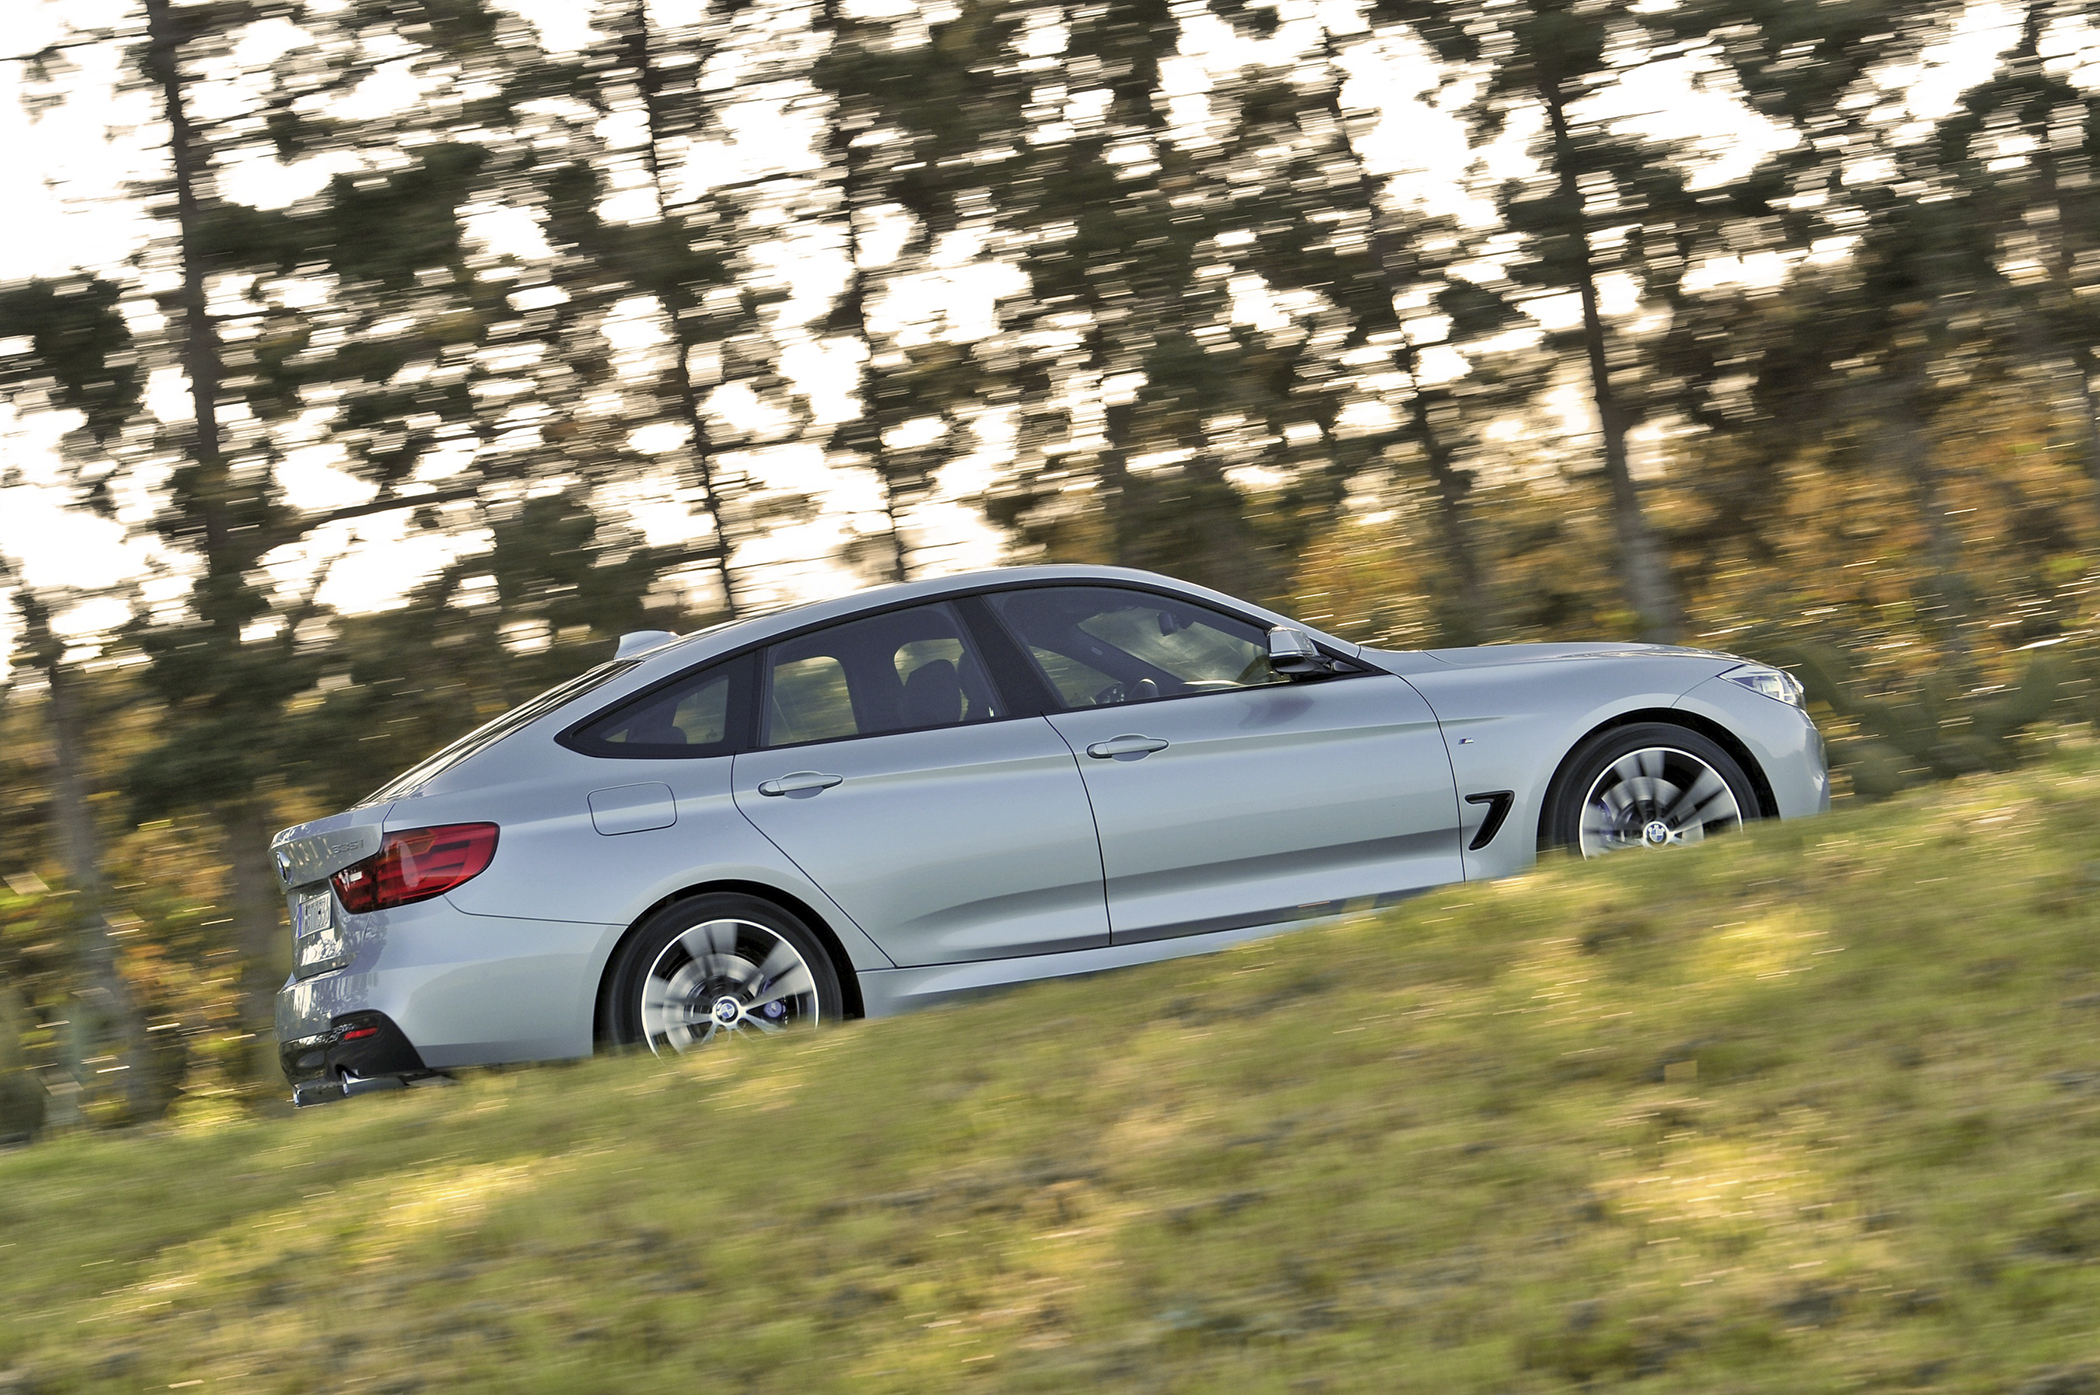 <strong>Best Wagon:</strong> Cars within the <a href="http://www.edmunds.com/bmw/m3/2015/" target="_blank">BMW 3 Series</a>, like the M3, are rated 5/5 stars by consumers, according to Edmunds, despite a total cost of more than $70,000. The BMW M3 depreciates less than other autos in the luxury segment, losing 47% of its value over five years.